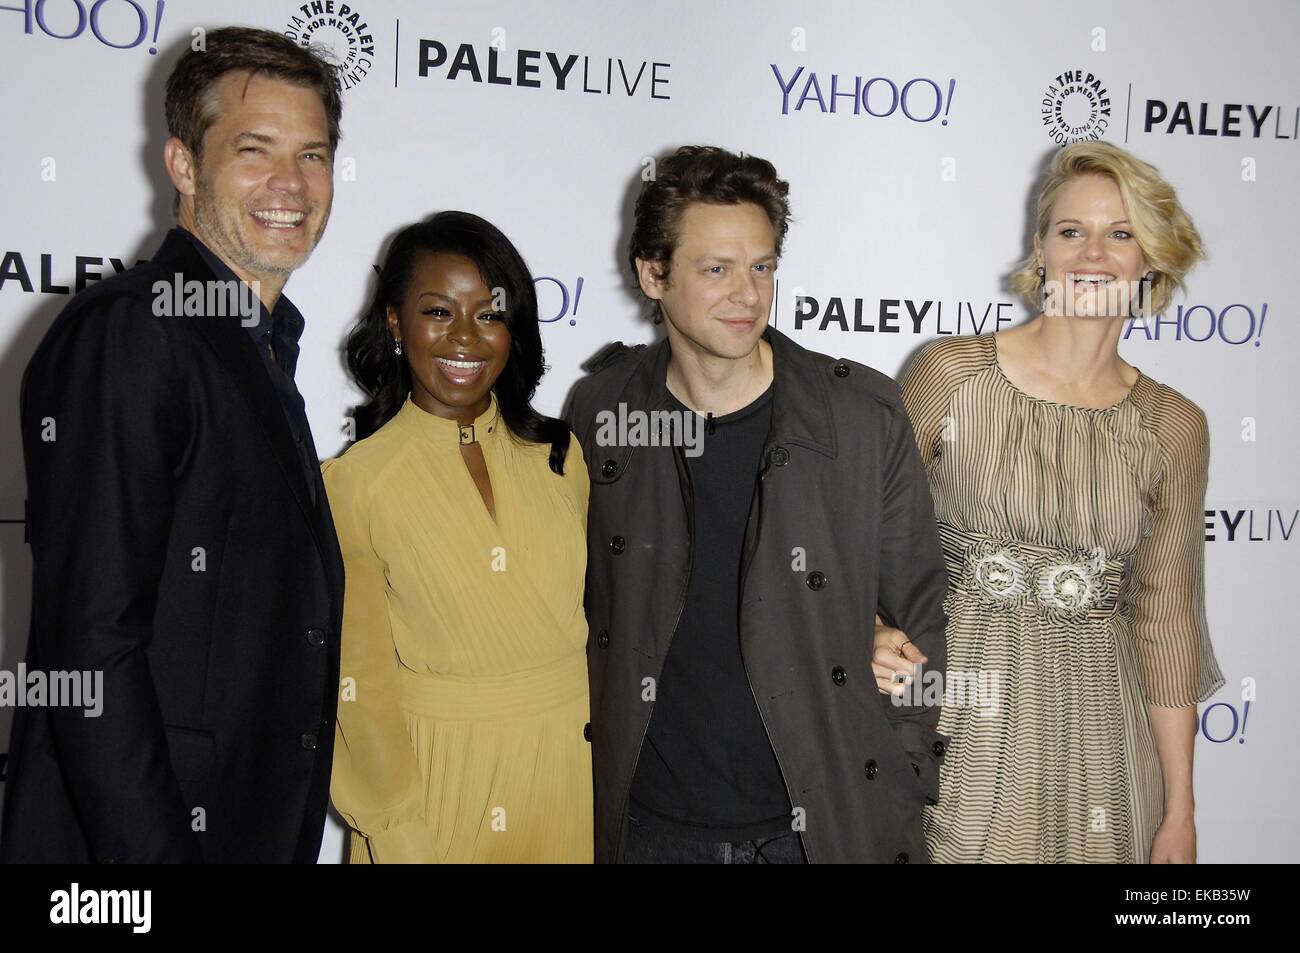 Los Angeles, CA, USA. 8th Apr, 2015. Timothy Olyphant, Erica Tazel, Jacob Pitts, Joelle Carter at arrivals for The Paley Center For Media Presents An Evening with FX'S JUSTIFIED, The Paley Center for Media, Los Angeles, CA April 8, 2015. Credit:  Michael Germana/Everett Collection/Alamy Live News Stock Photo